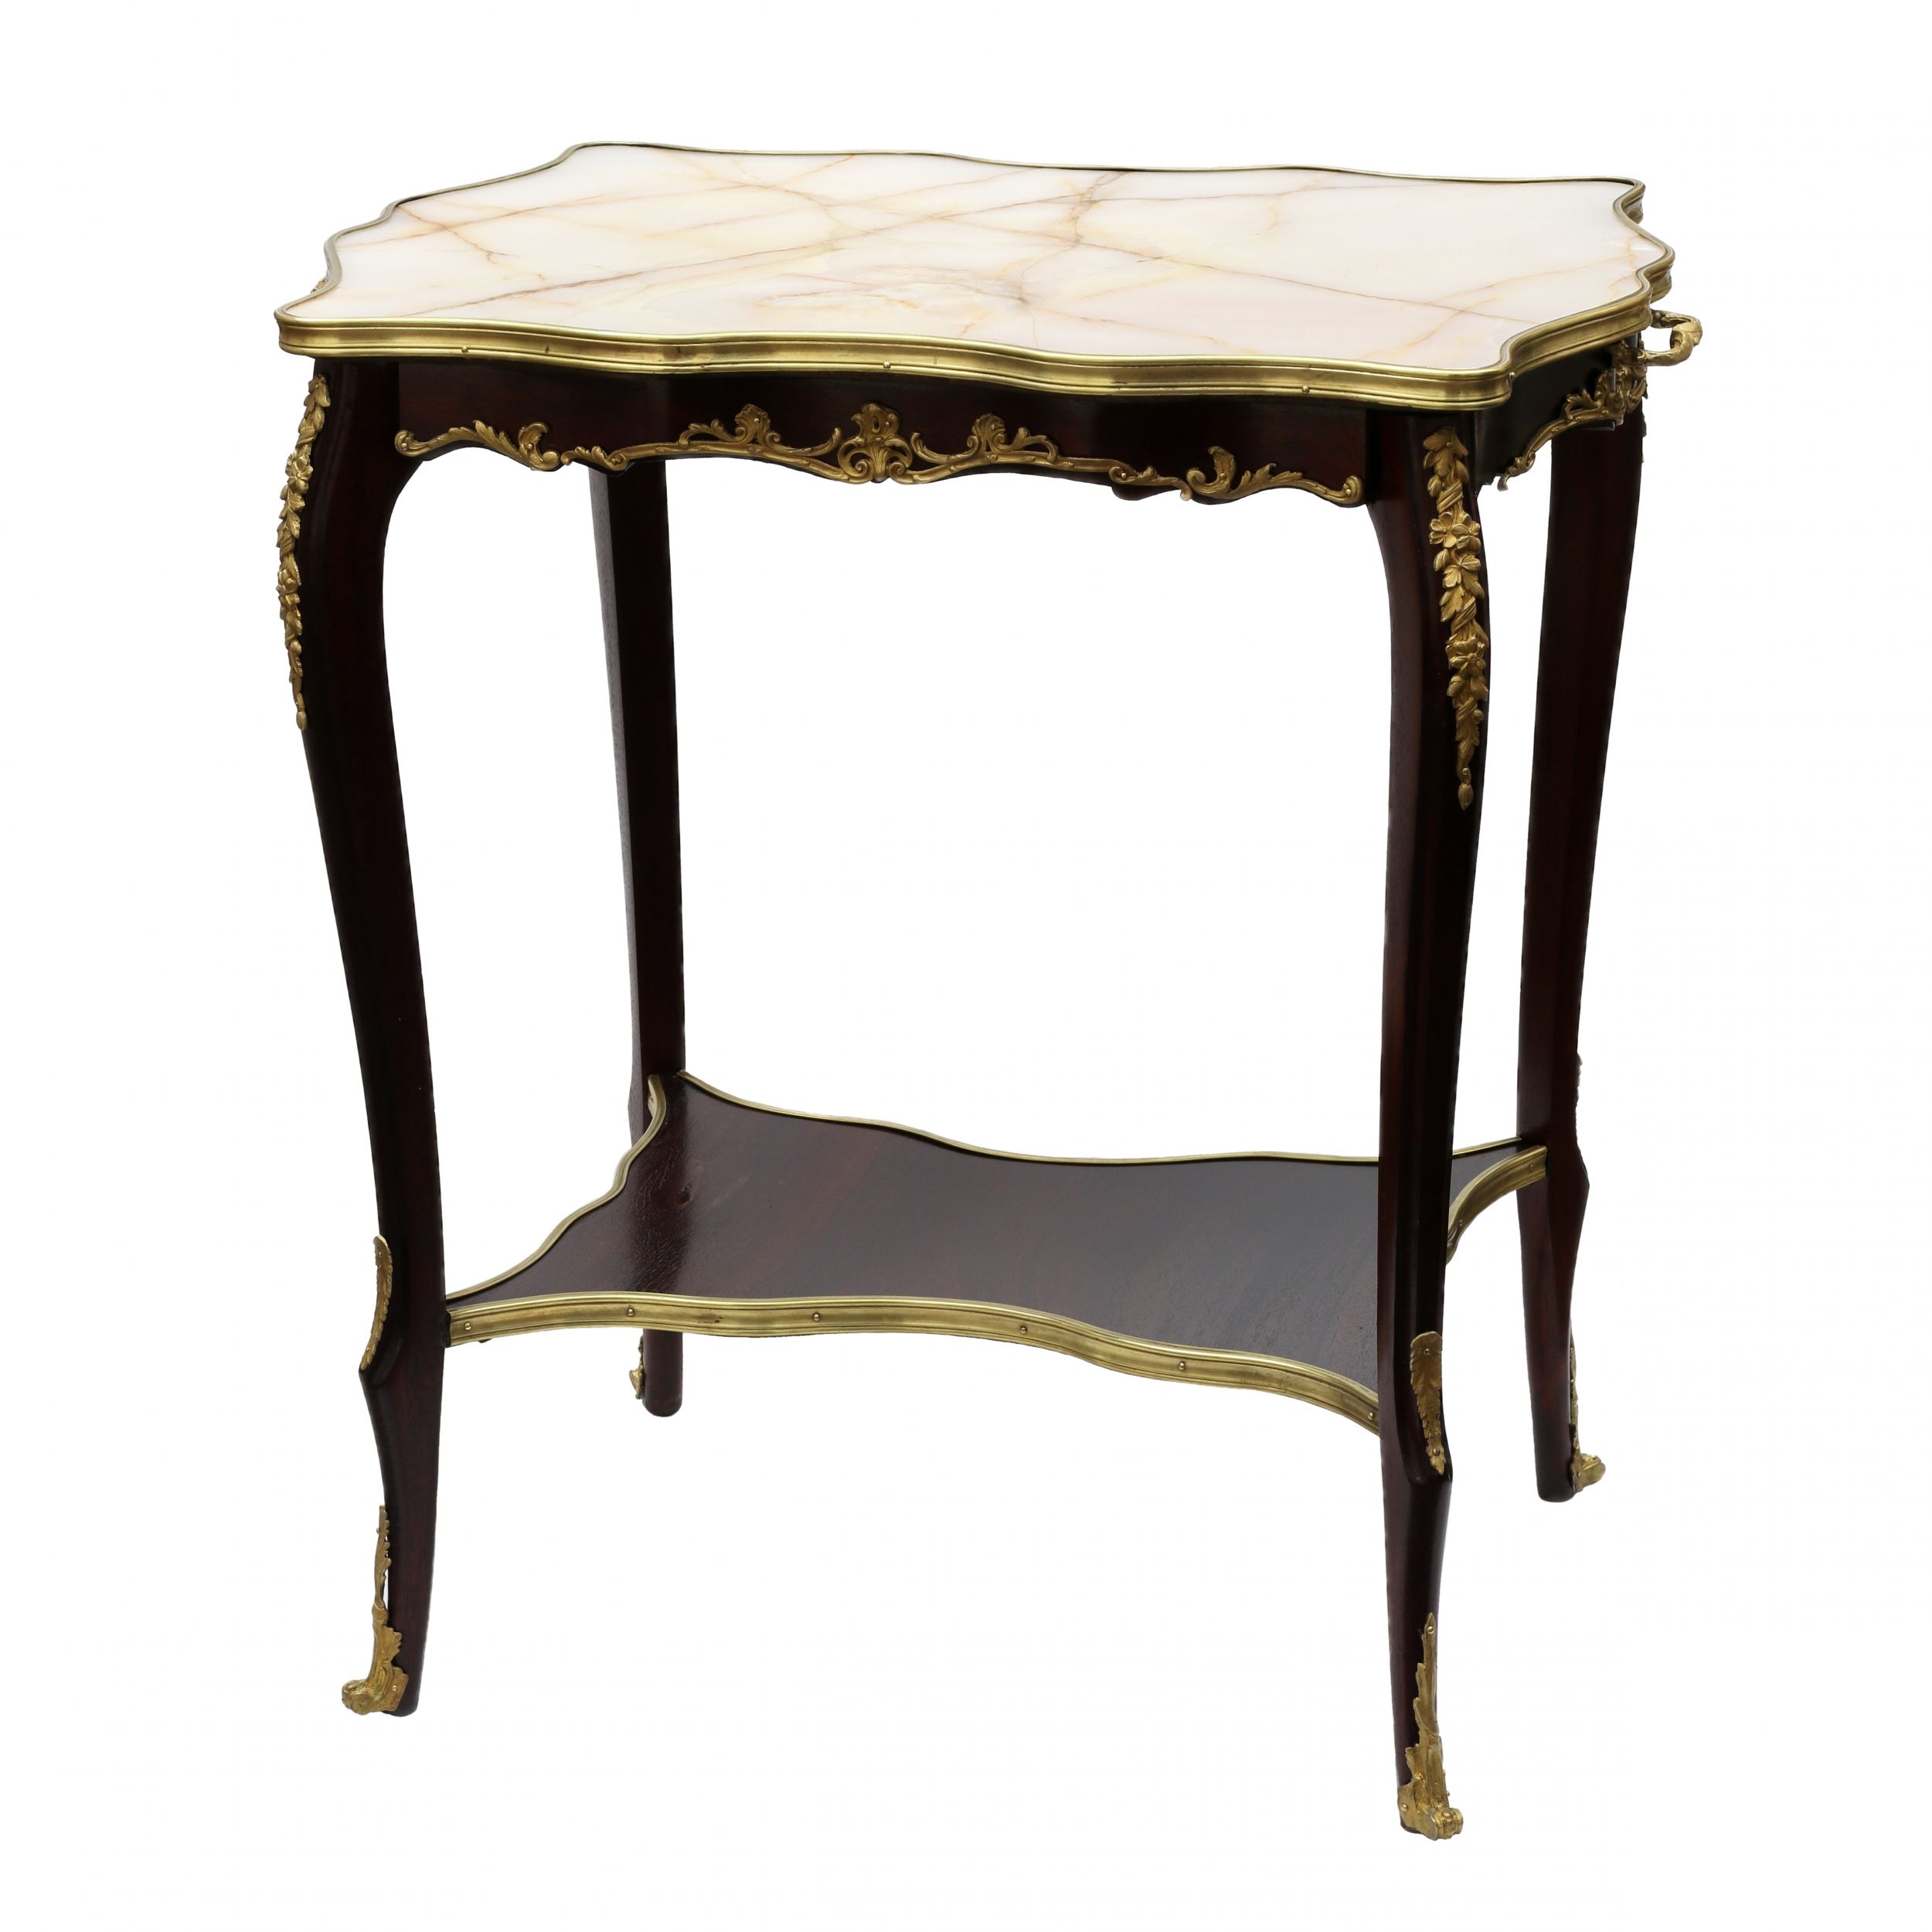 Serving-table-mahogany-gilded-bronze-with-a-marble-top-of-the-turn-of-the-19th-and-20th-centuries-